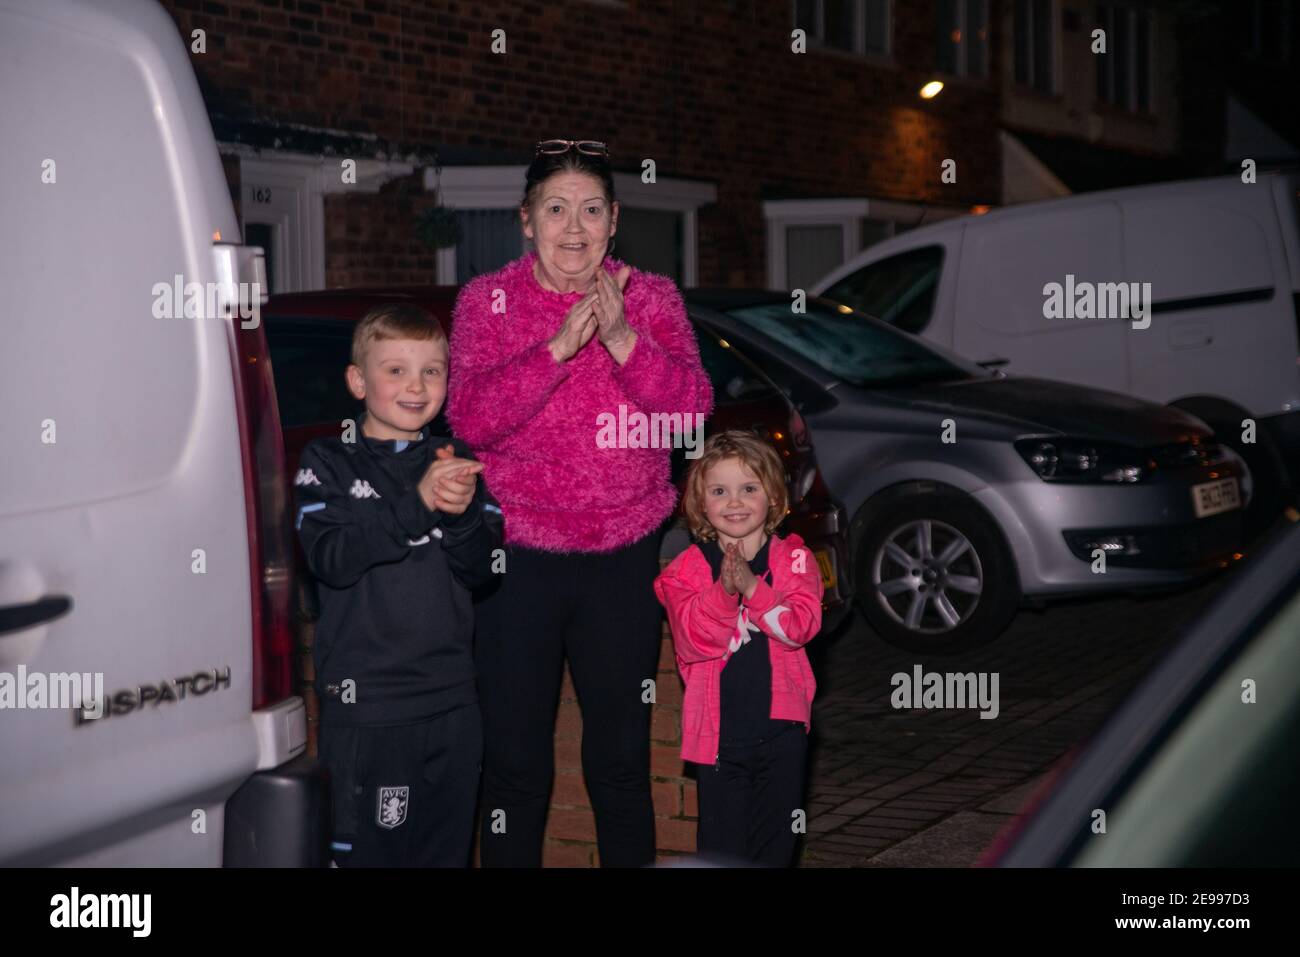 Birmingham, West Midlands, UK. 3rd February 2021: A lady and two young children stand clapping at the end of their driveway at 6PM, after Boris Johnson called for the nation to pay respects to Captain Tom Moore who passed away at the age of 100 on Tuesday, after a fight with Covid-19. (Parental consent provided for children in photograph) Credit: Ryan Underwood / Alamy Live News Stock Photo